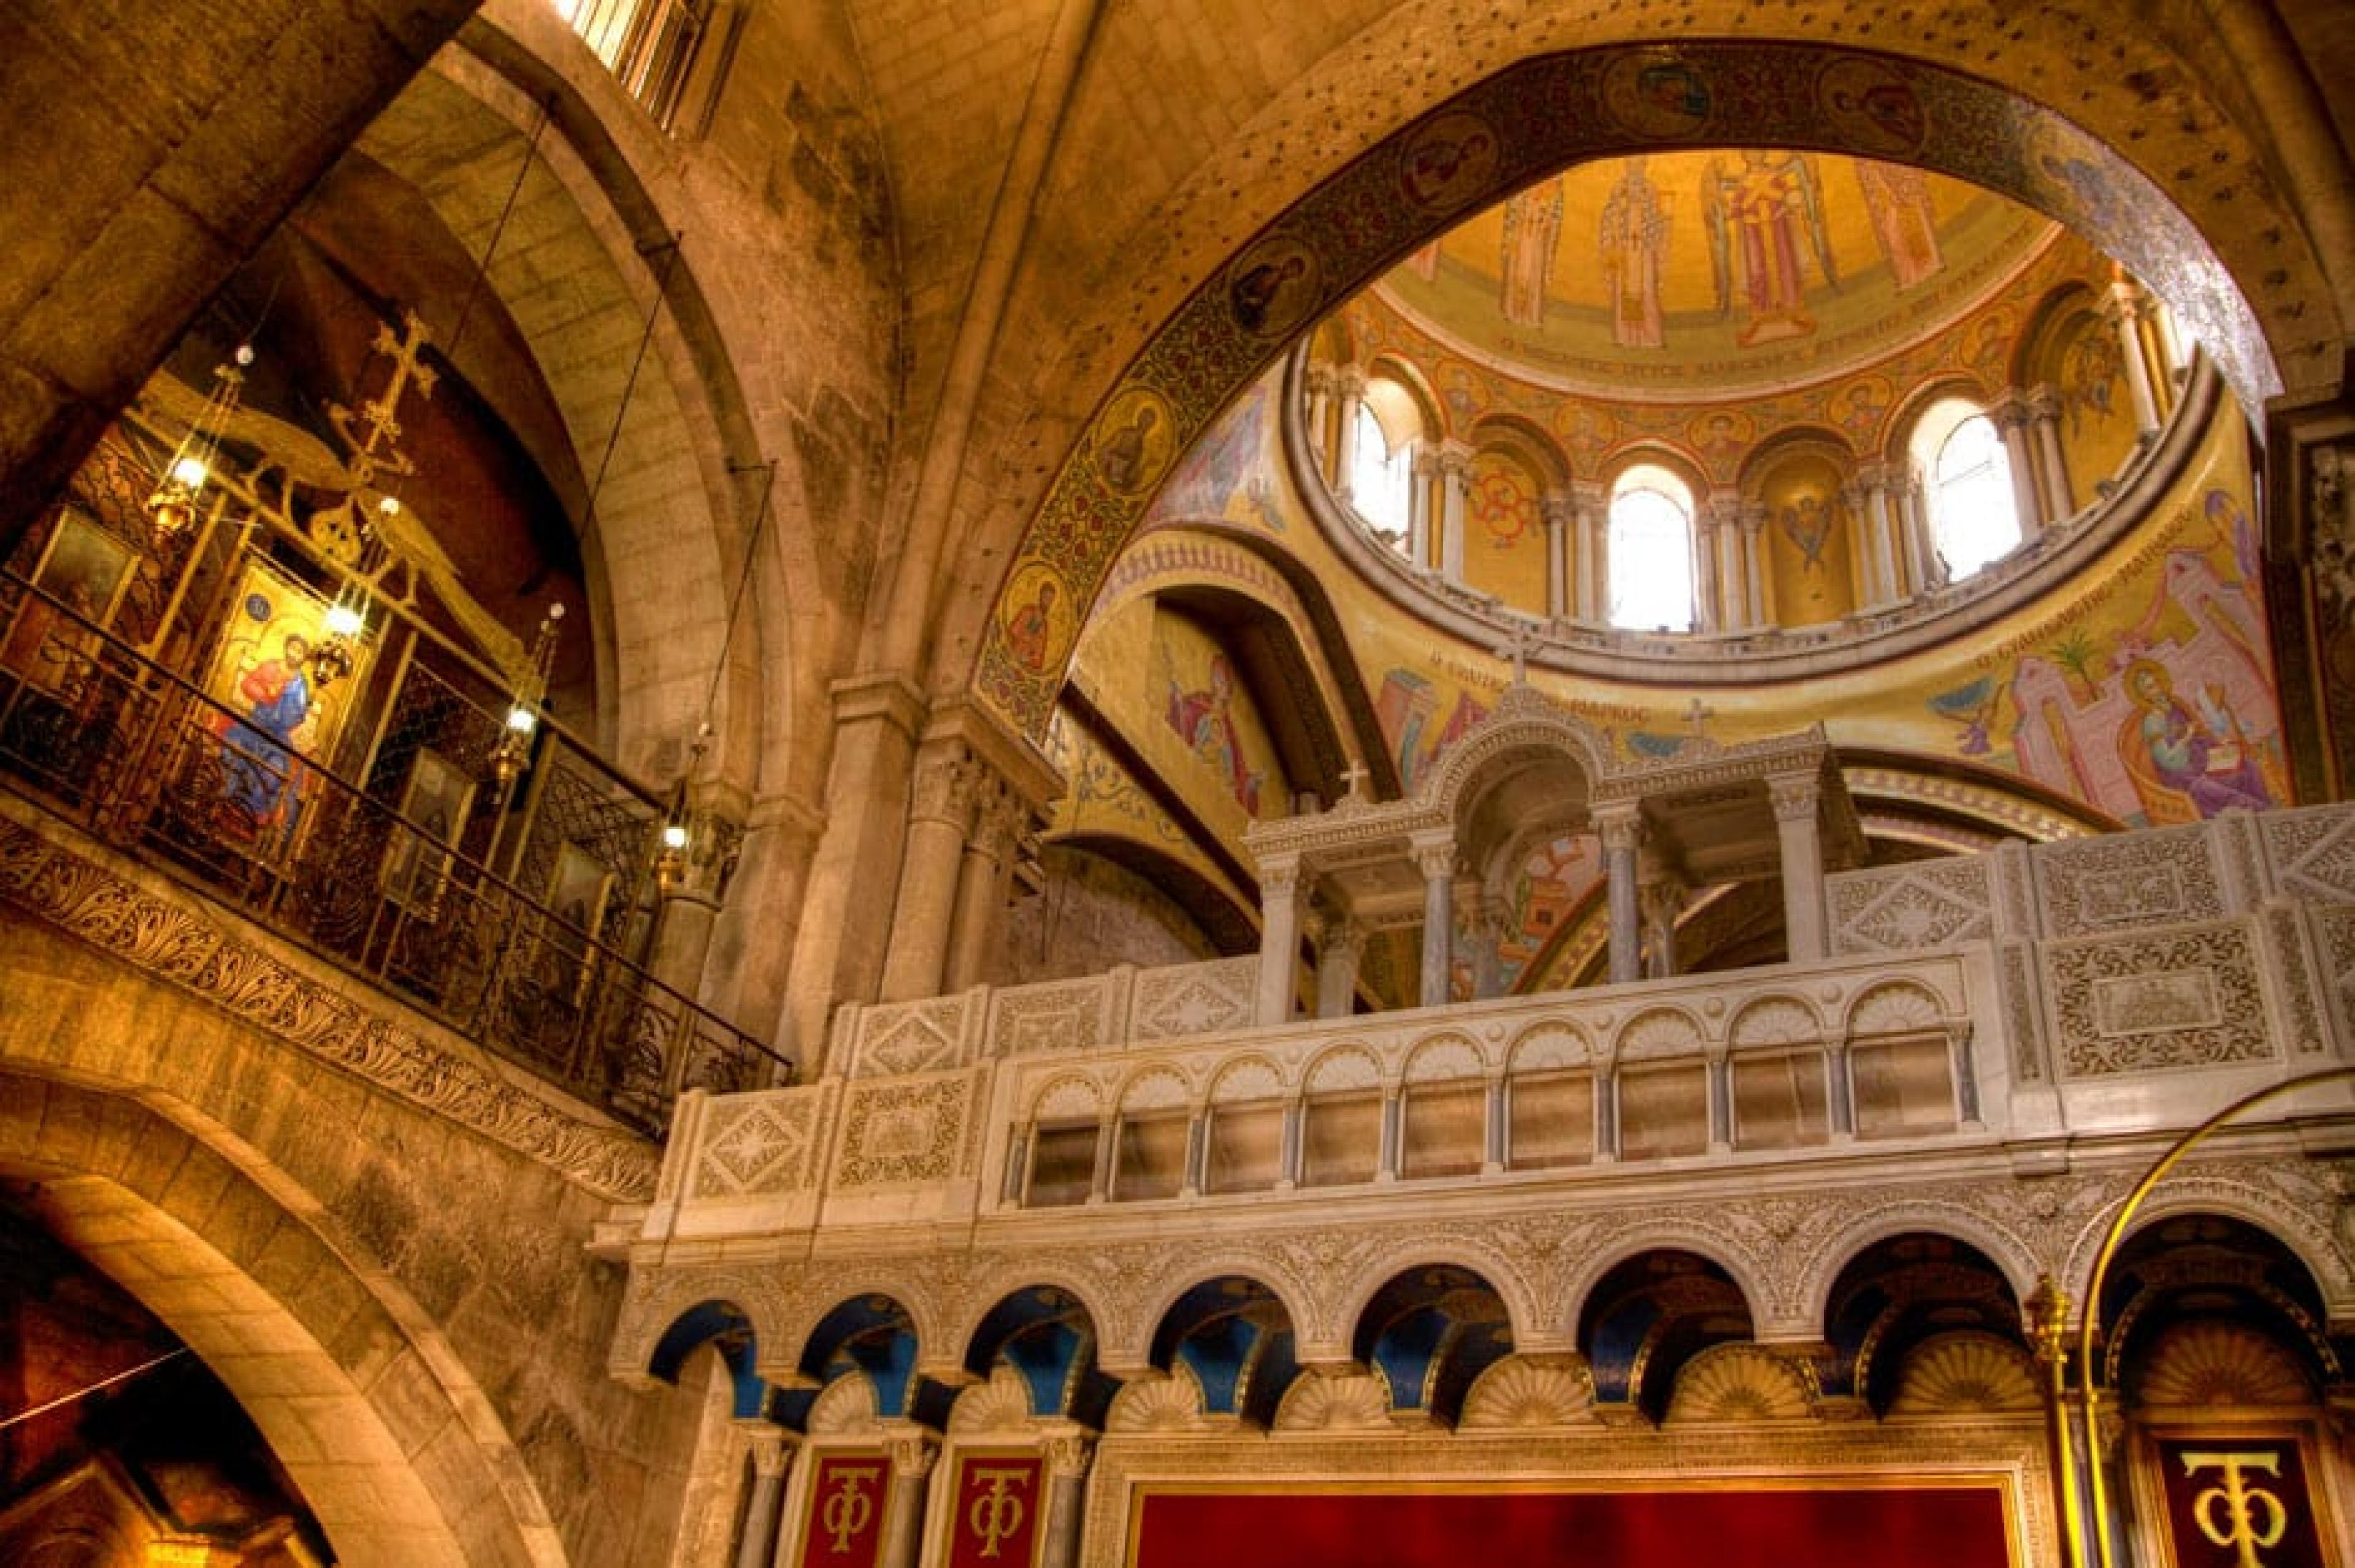 Interior View - Church of the Holy Sepulchre,Jerusalem, Israel - Courtesy of the Israeli Ministry of Tourism